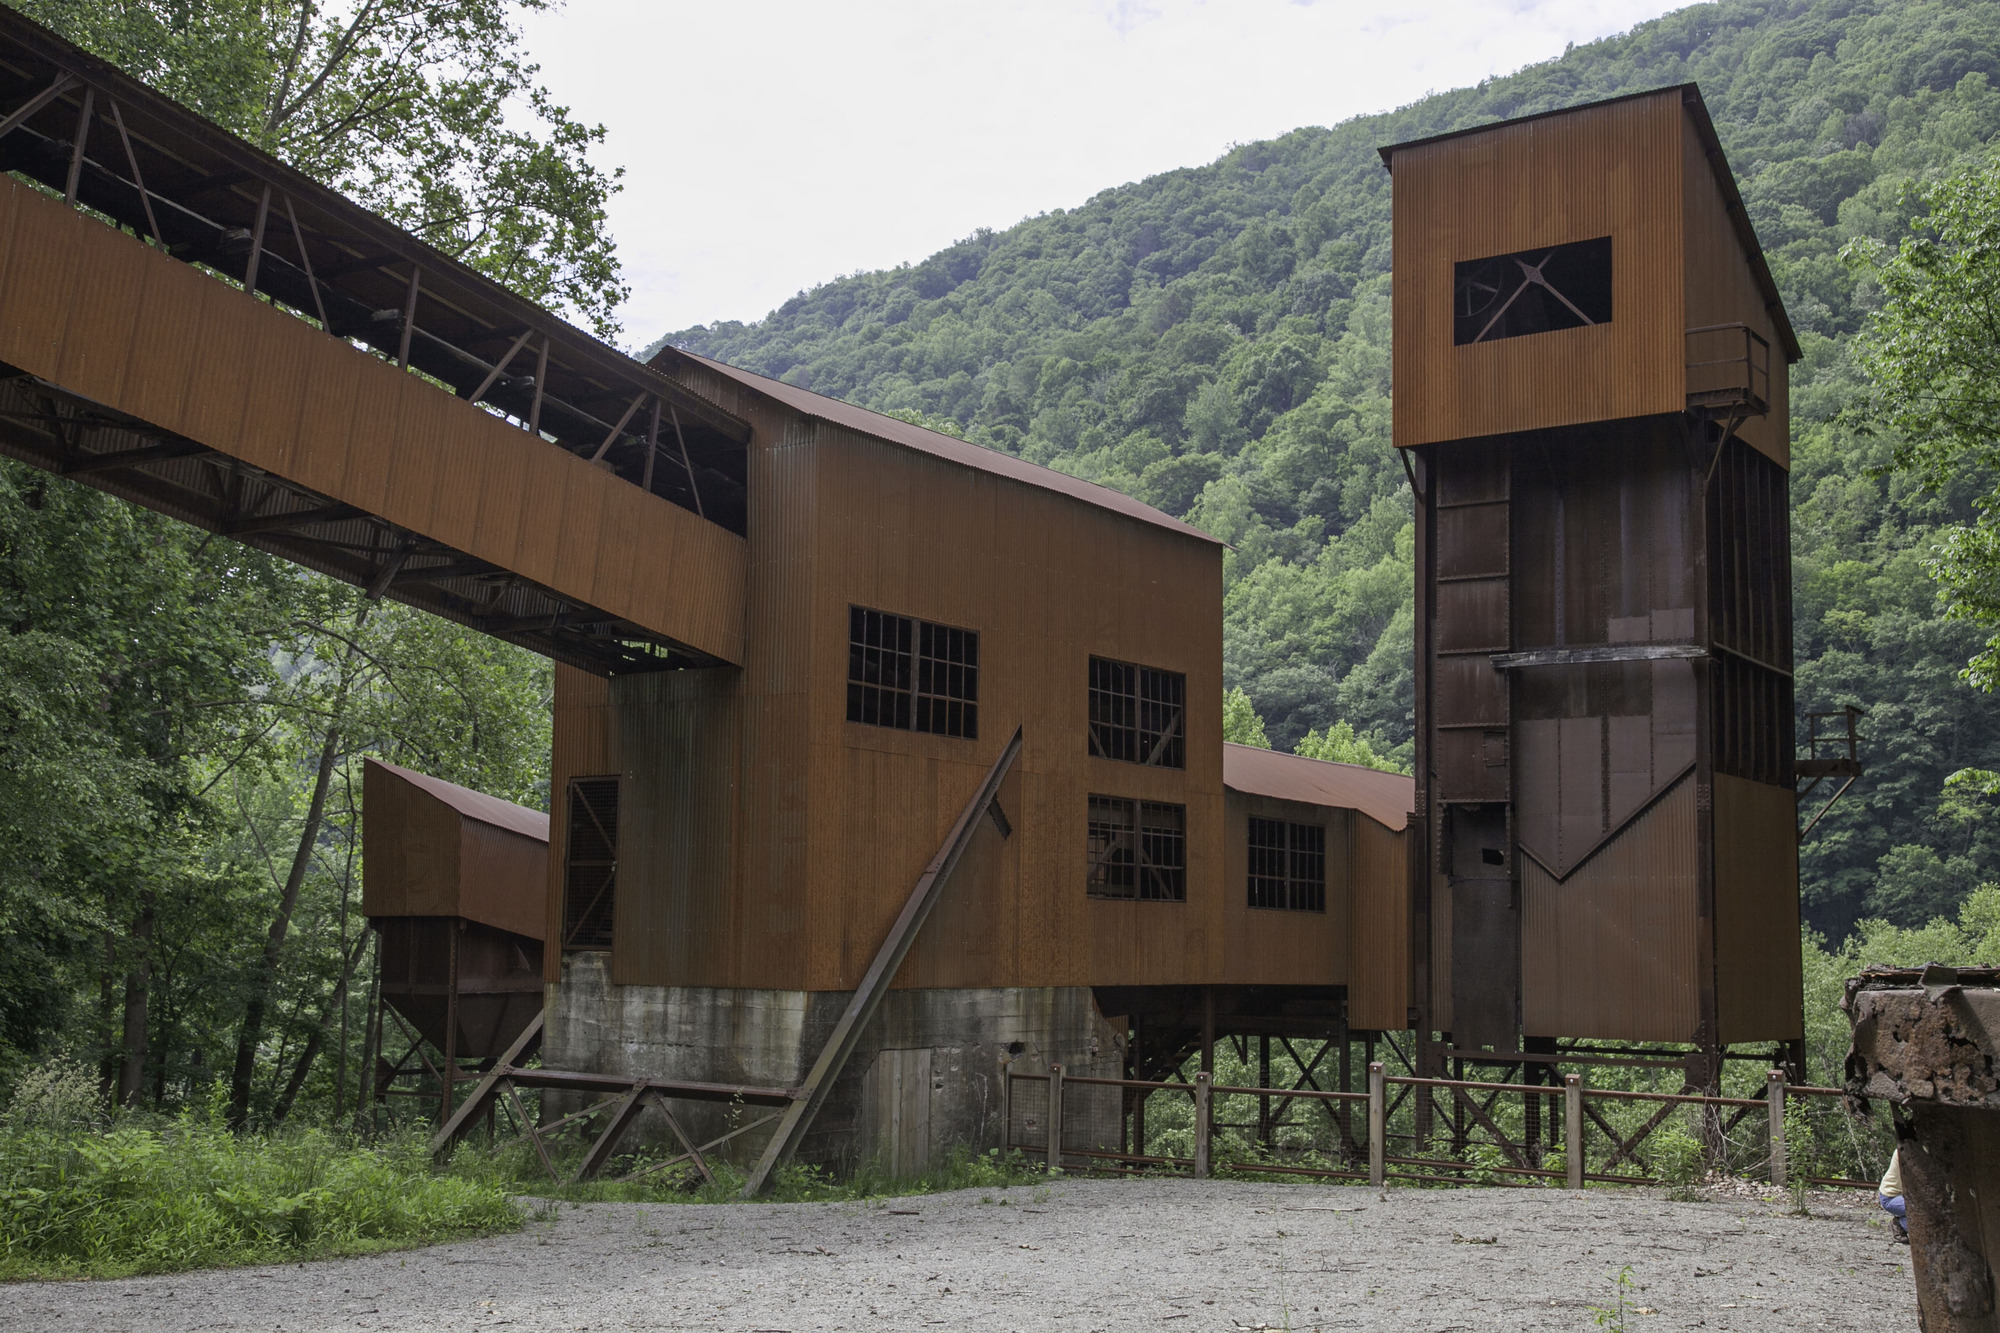 rusted metal building with coal conveyor feeding into it